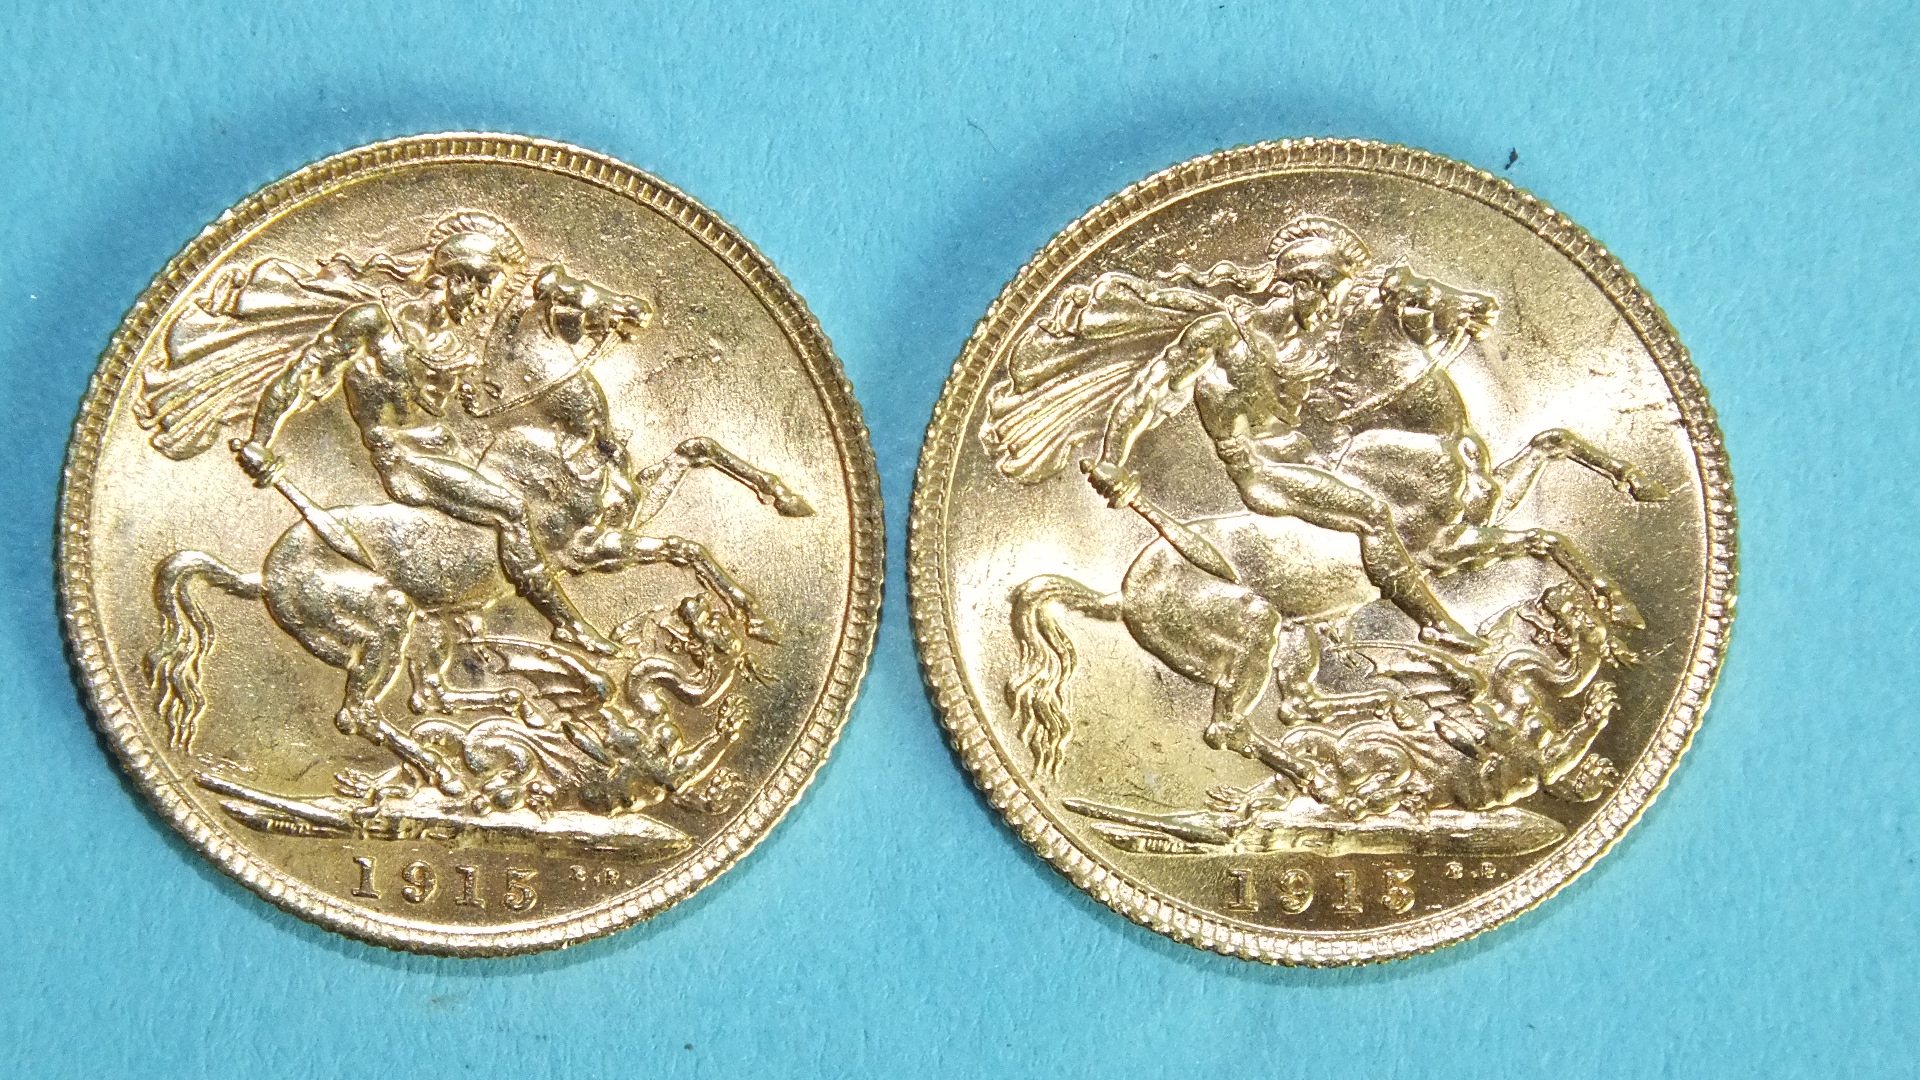 Two George V 1915 sovereigns, (2).